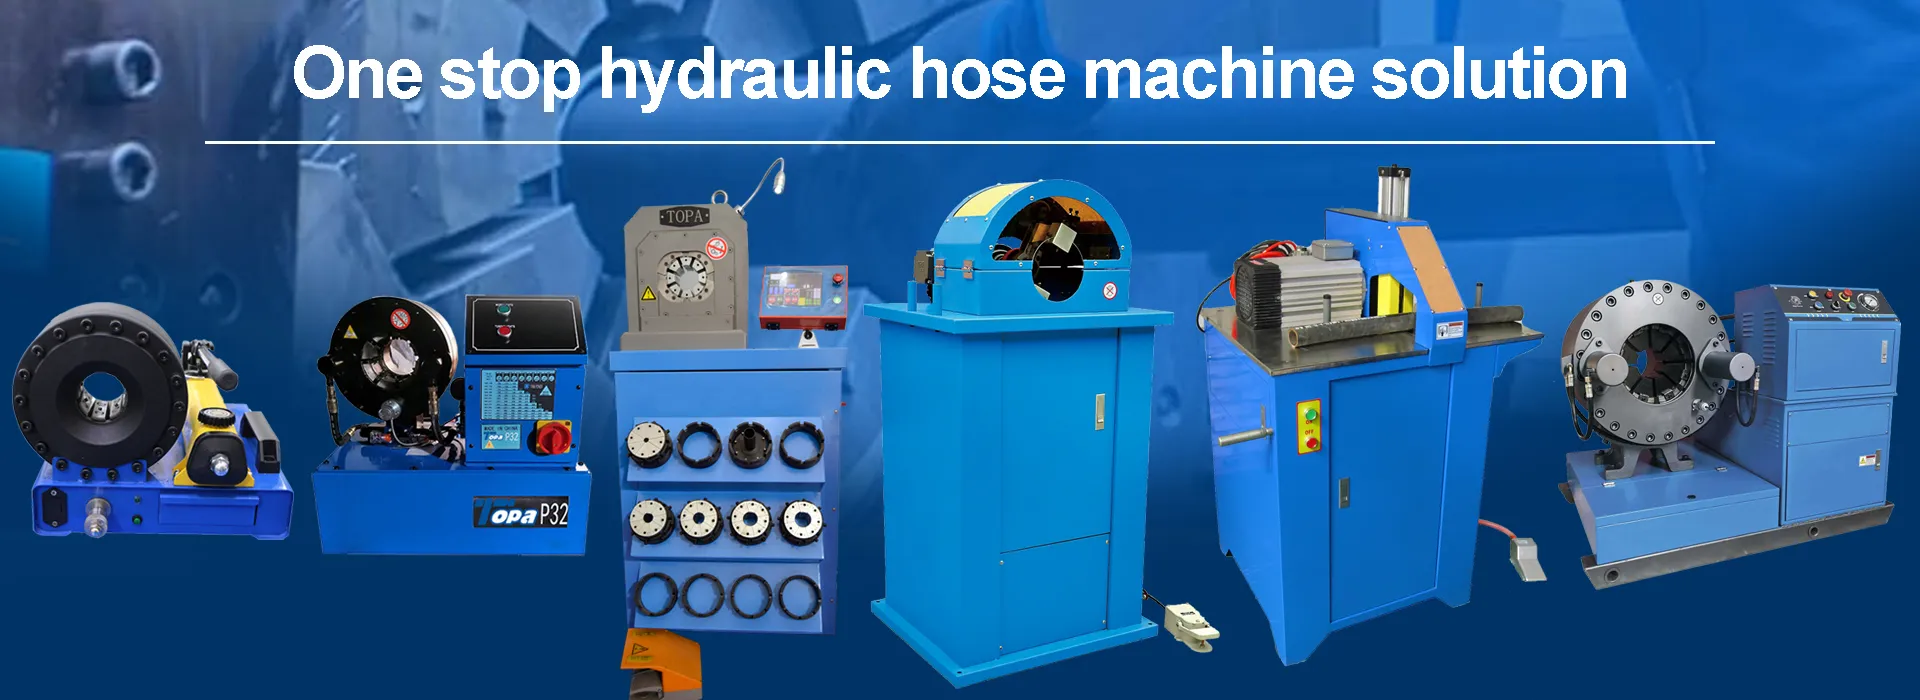 One stop Hydraulic hose machine solution